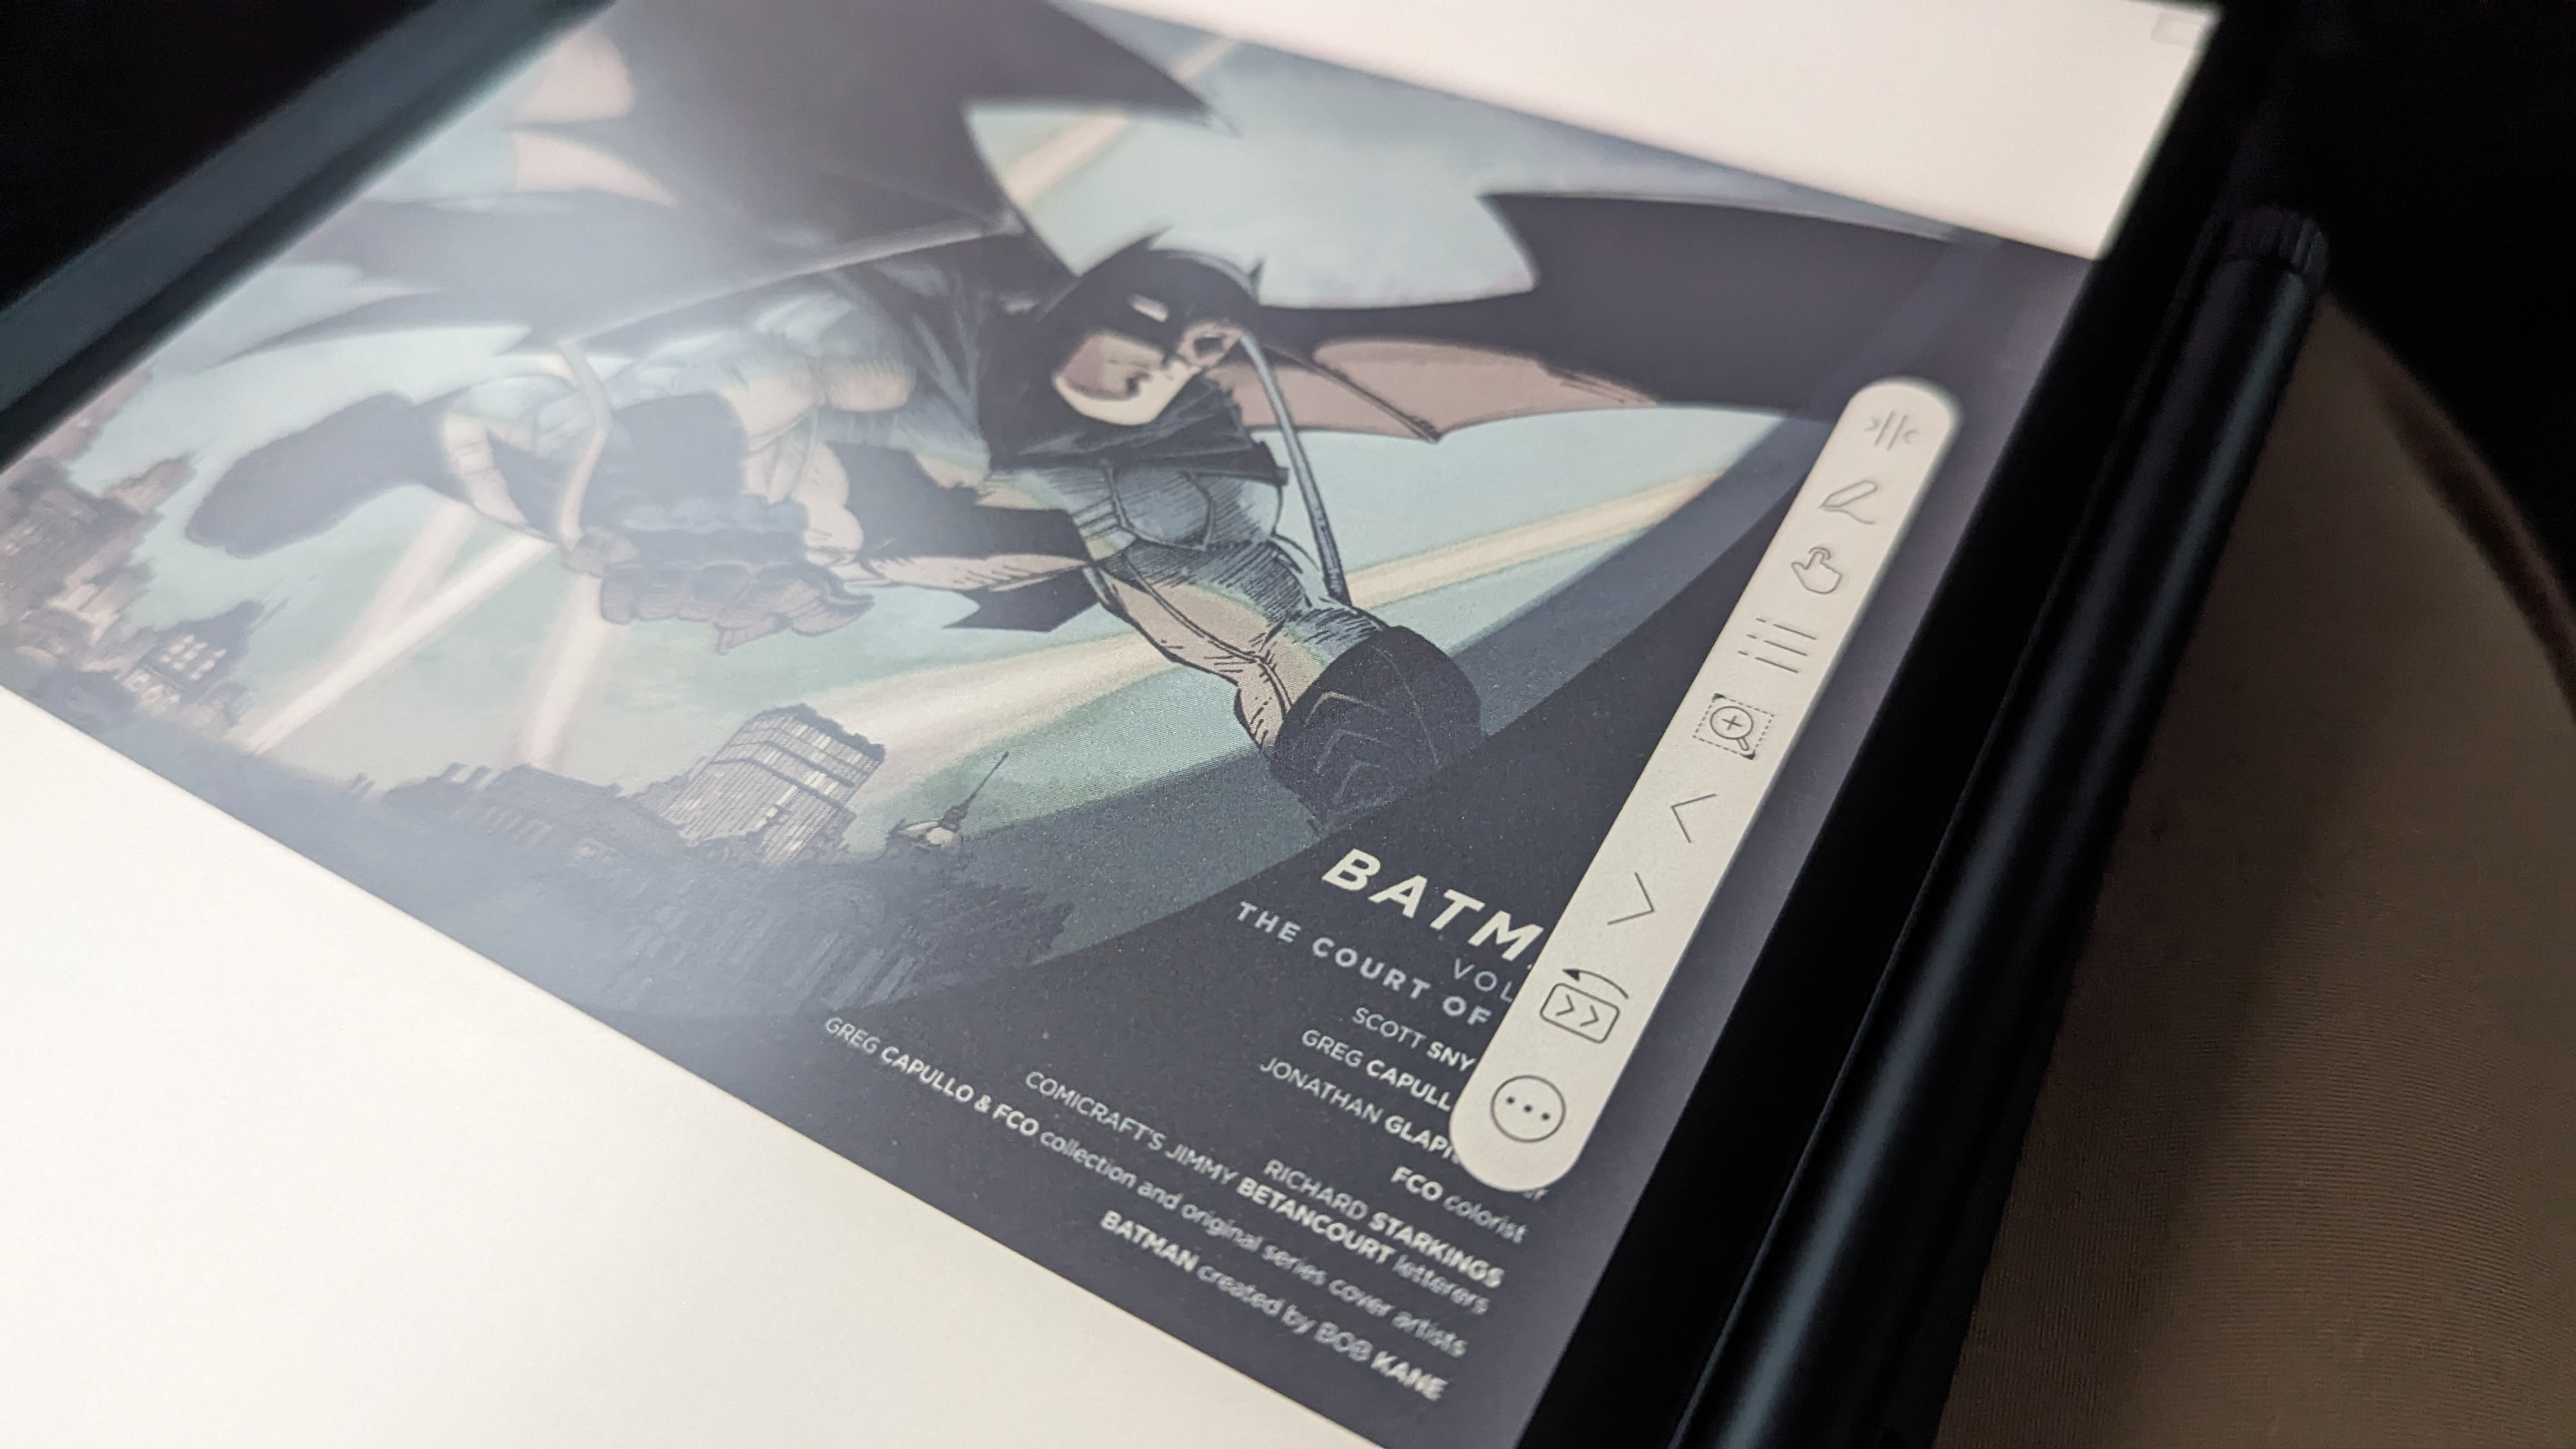 Onyx Boox Tab Ultra C review: The best E Ink tablet, now in color